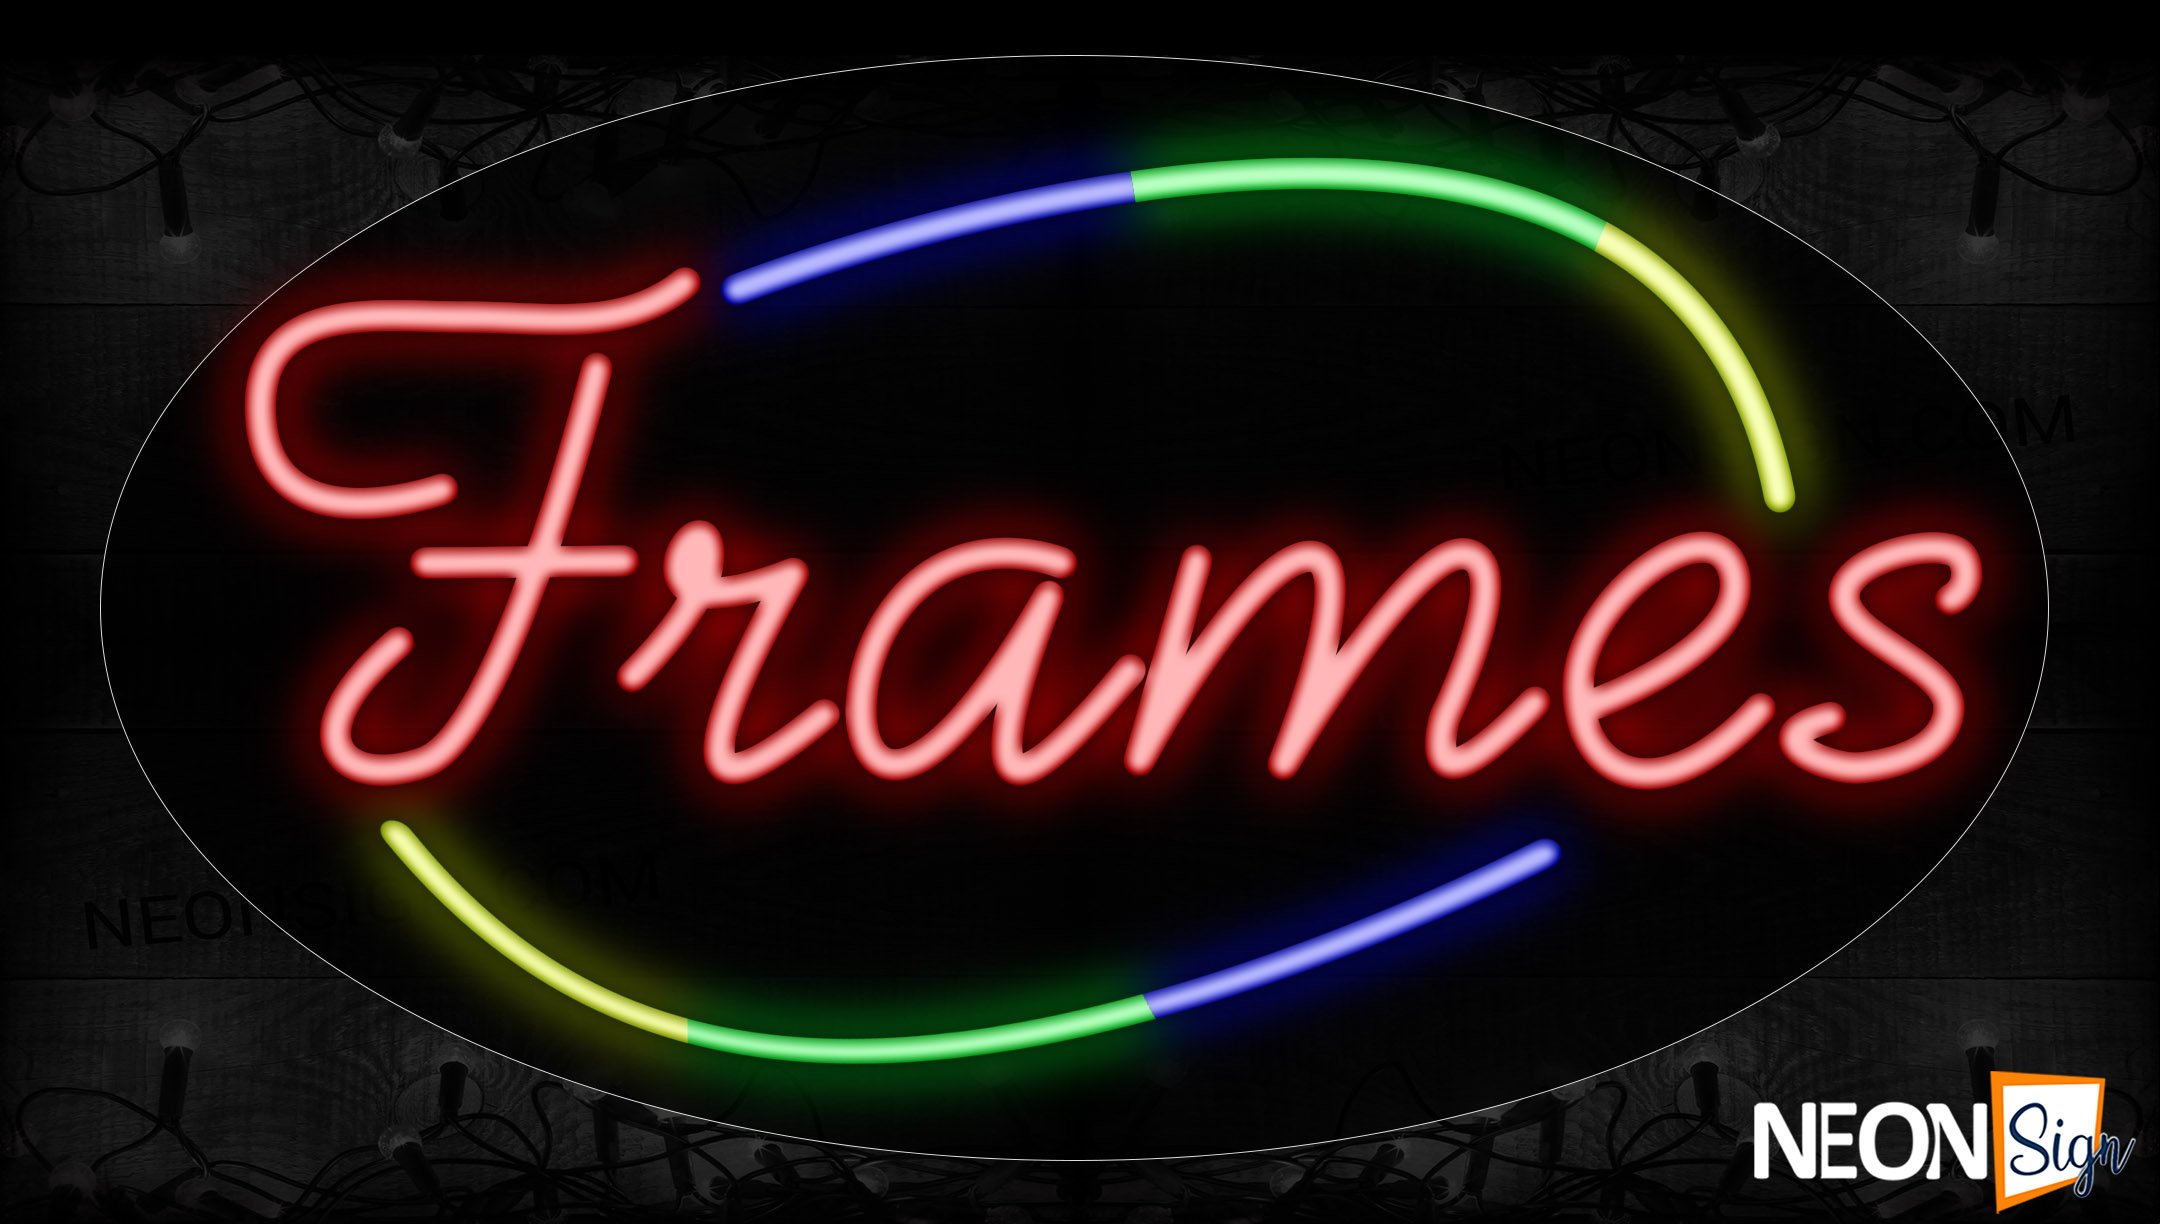 Image of 14520 Frames In Red With Colorful Arc Border Neon Signs_17x30 Contoured Black Backing